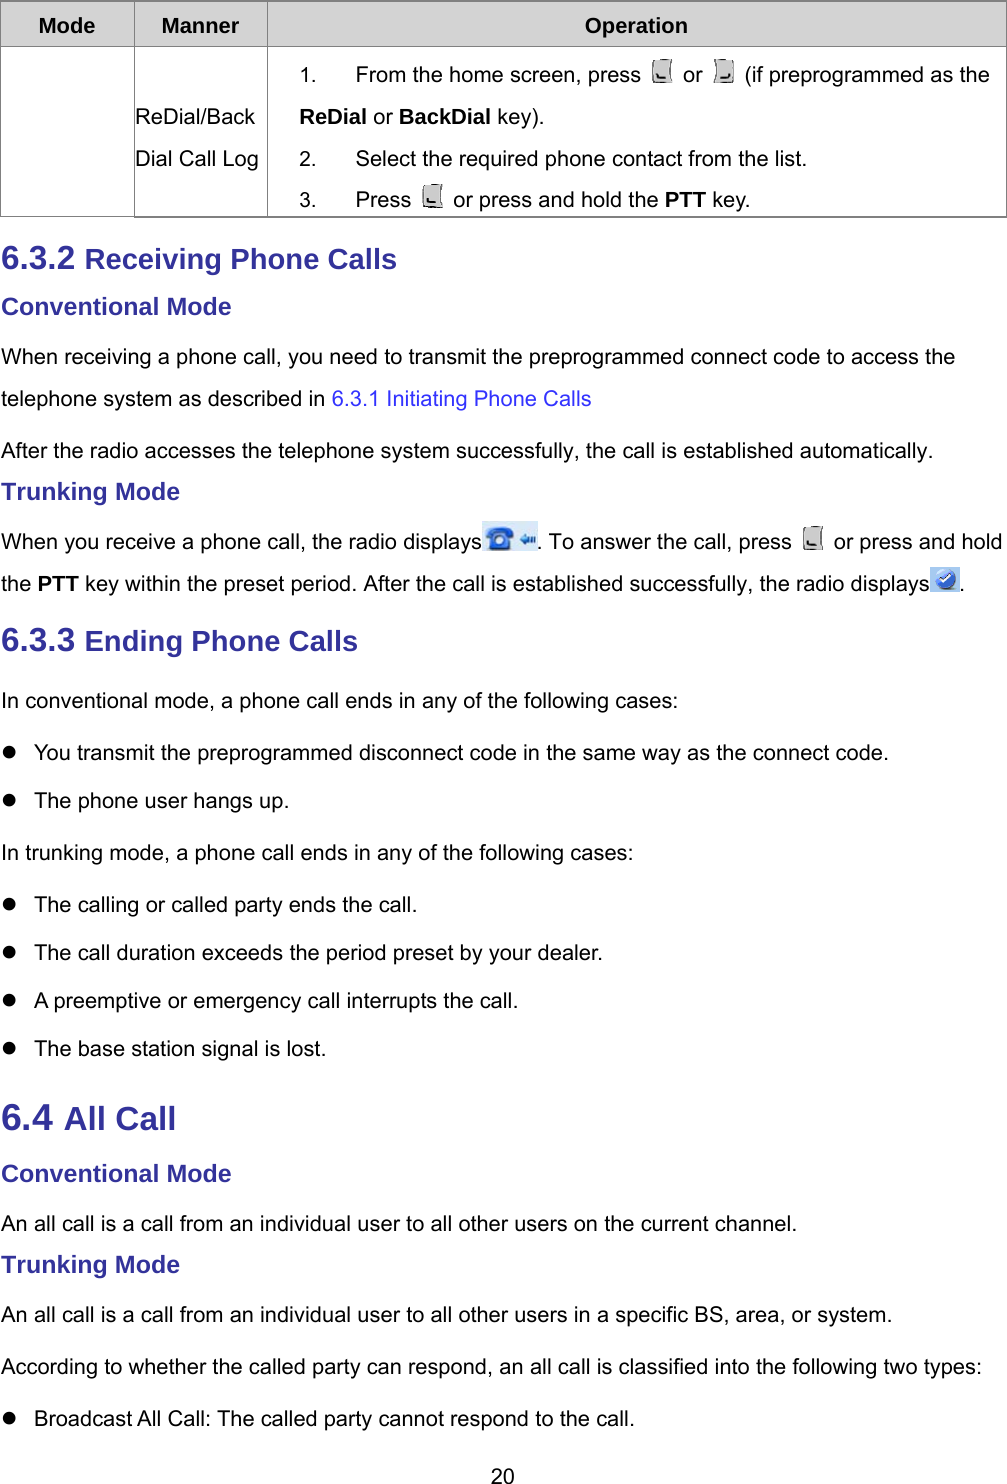  20  Mode  Manner  Operation ReDial/BackDial Call Log1.  From the home screen, press   or    (if preprogrammed as the ReDial or BackDial key). 2.  Select the required phone contact from the list. 3.  Press    or press and hold the PTT key. 6.3.2 Receiving Phone Calls Conventional Mode When receiving a phone call, you need to transmit the preprogrammed connect code to access the telephone system as described in 6.3.1 Initiating Phone Calls  After the radio accesses the telephone system successfully, the call is established automatically. Trunking Mode When you receive a phone call, the radio displays . To answer the call, press    or press and hold the PTT key within the preset period. After the call is established successfully, the radio displays . 6.3.3 Ending Phone Calls In conventional mode, a phone call ends in any of the following cases:   You transmit the preprogrammed disconnect code in the same way as the connect code.   The phone user hangs up. In trunking mode, a phone call ends in any of the following cases:   The calling or called party ends the call.   The call duration exceeds the period preset by your dealer.   A preemptive or emergency call interrupts the call.   The base station signal is lost. 6.4 All Call Conventional Mode An all call is a call from an individual user to all other users on the current channel. Trunking Mode An all call is a call from an individual user to all other users in a specific BS, area, or system. According to whether the called party can respond, an all call is classified into the following two types:   Broadcast All Call: The called party cannot respond to the call. 